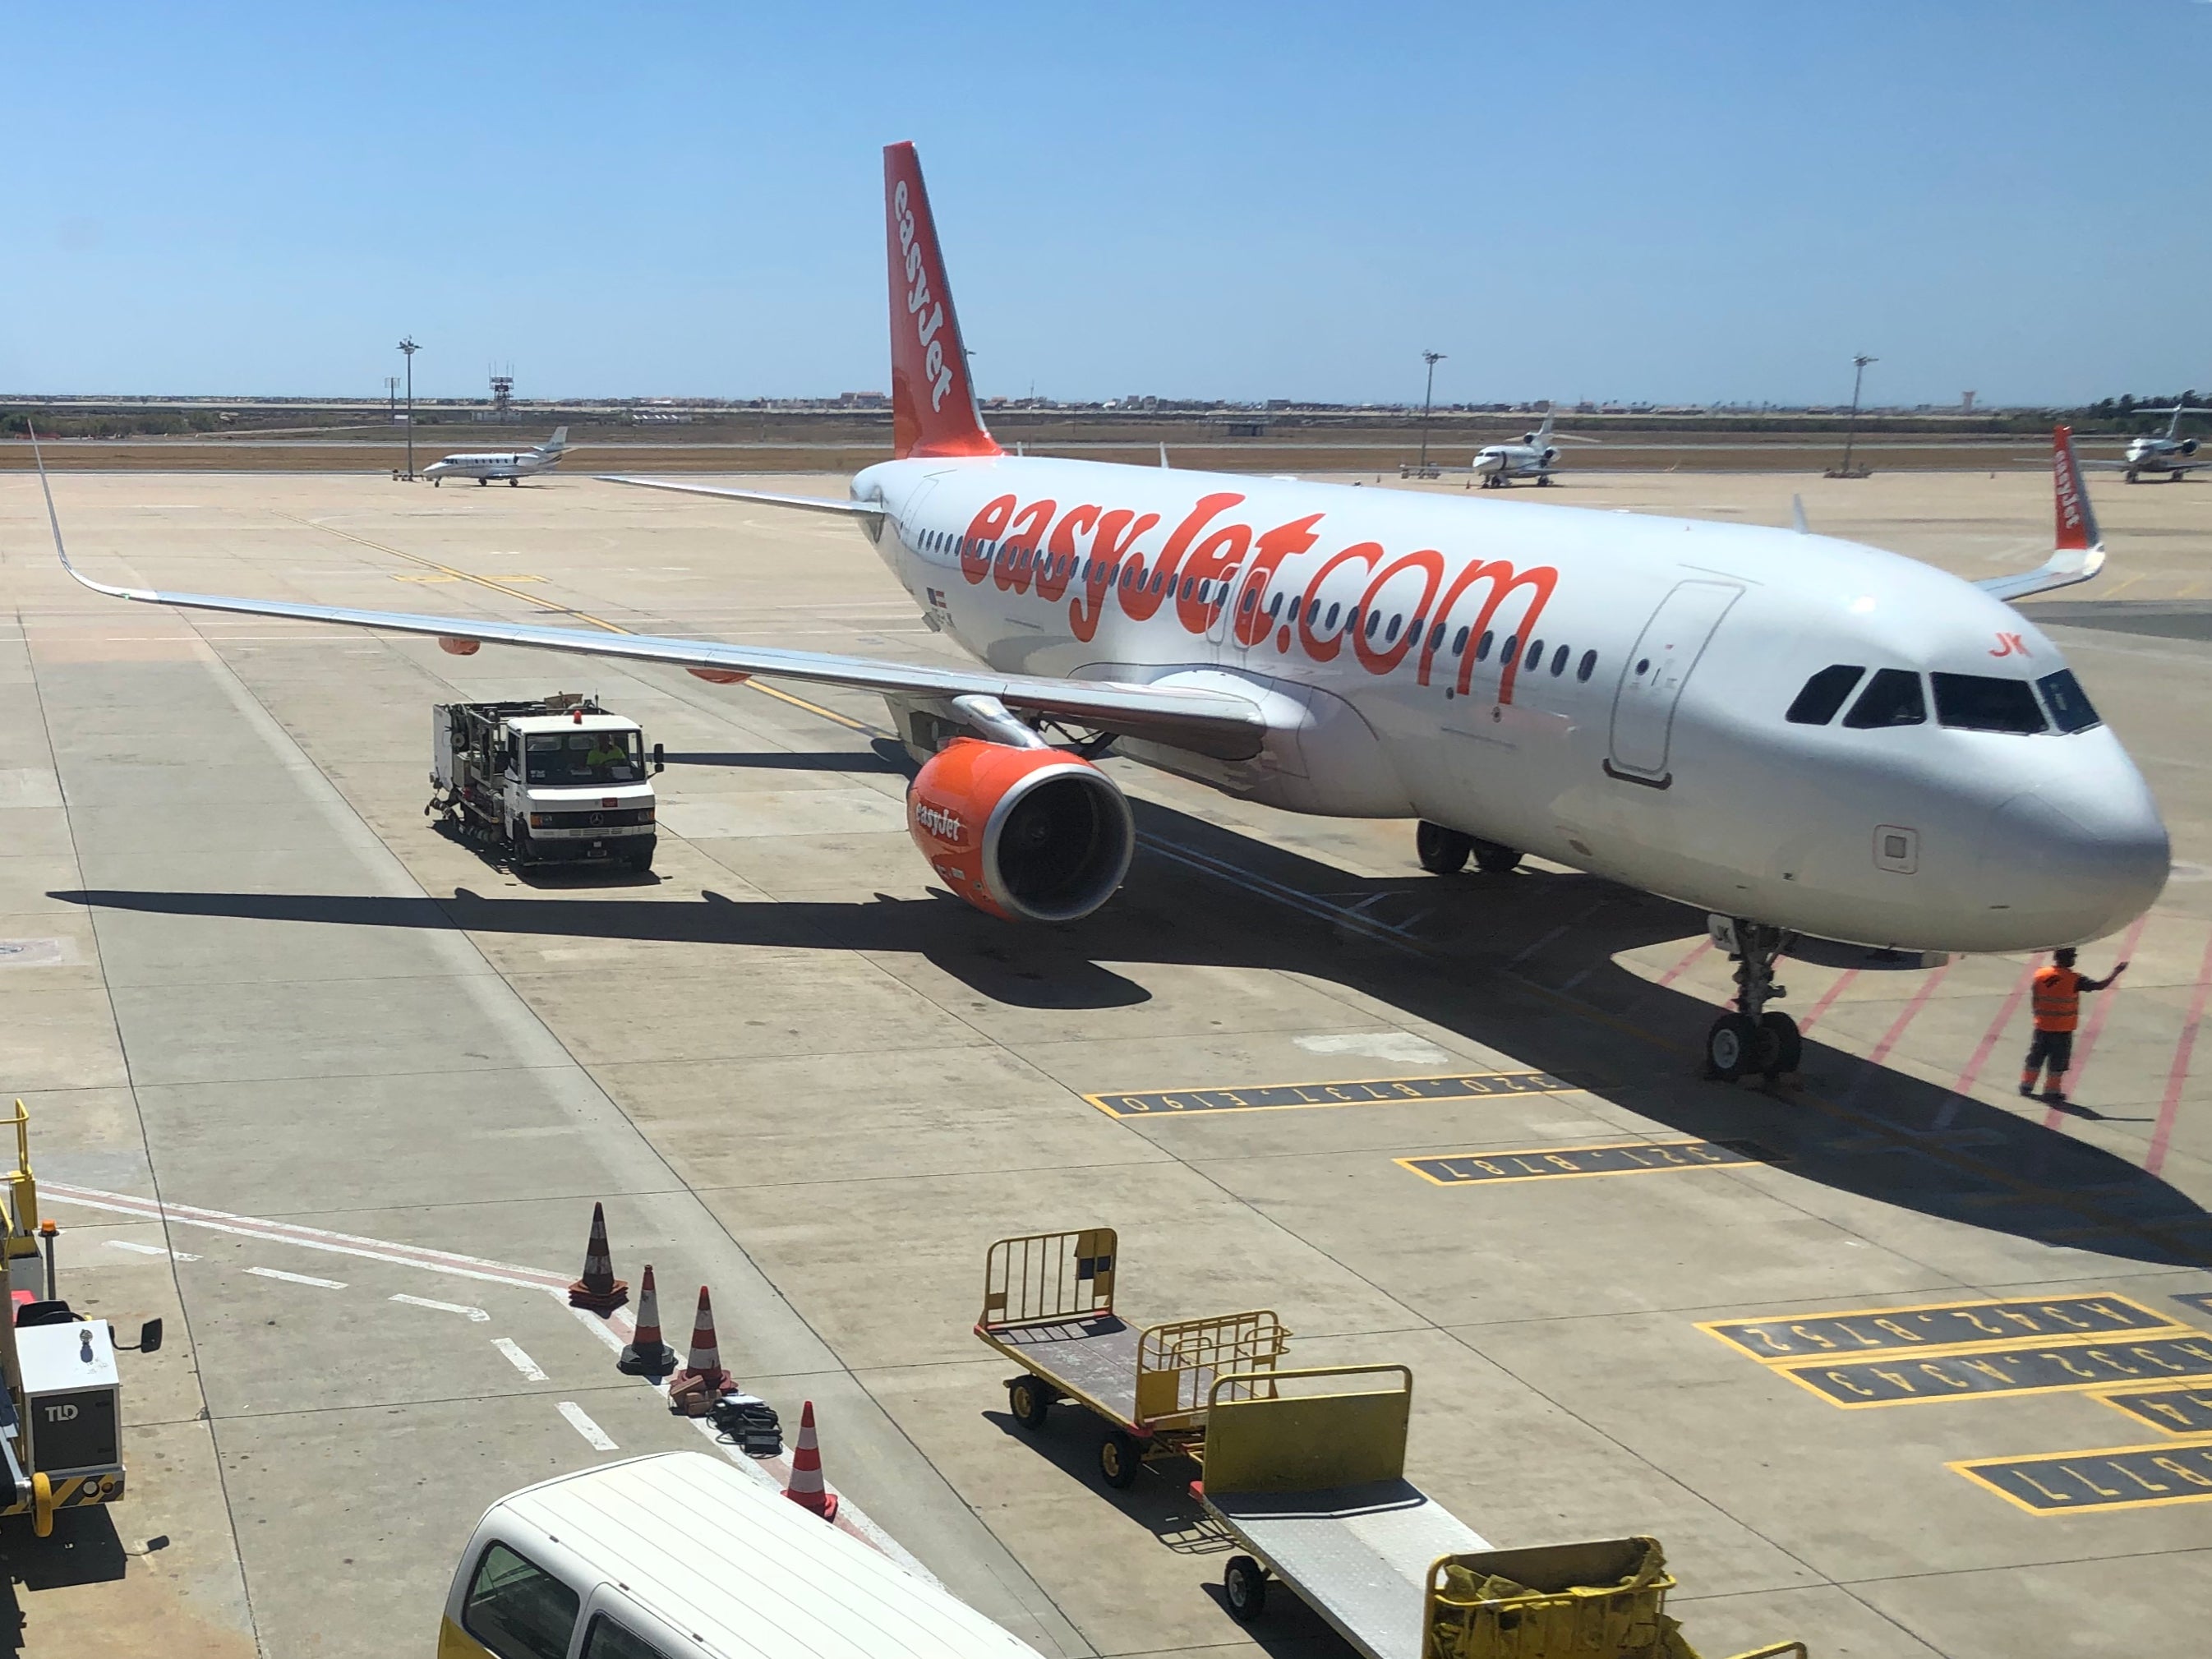 Departing soon? An Airbus A320 belonging to easyJet at Faro airport in Portugal